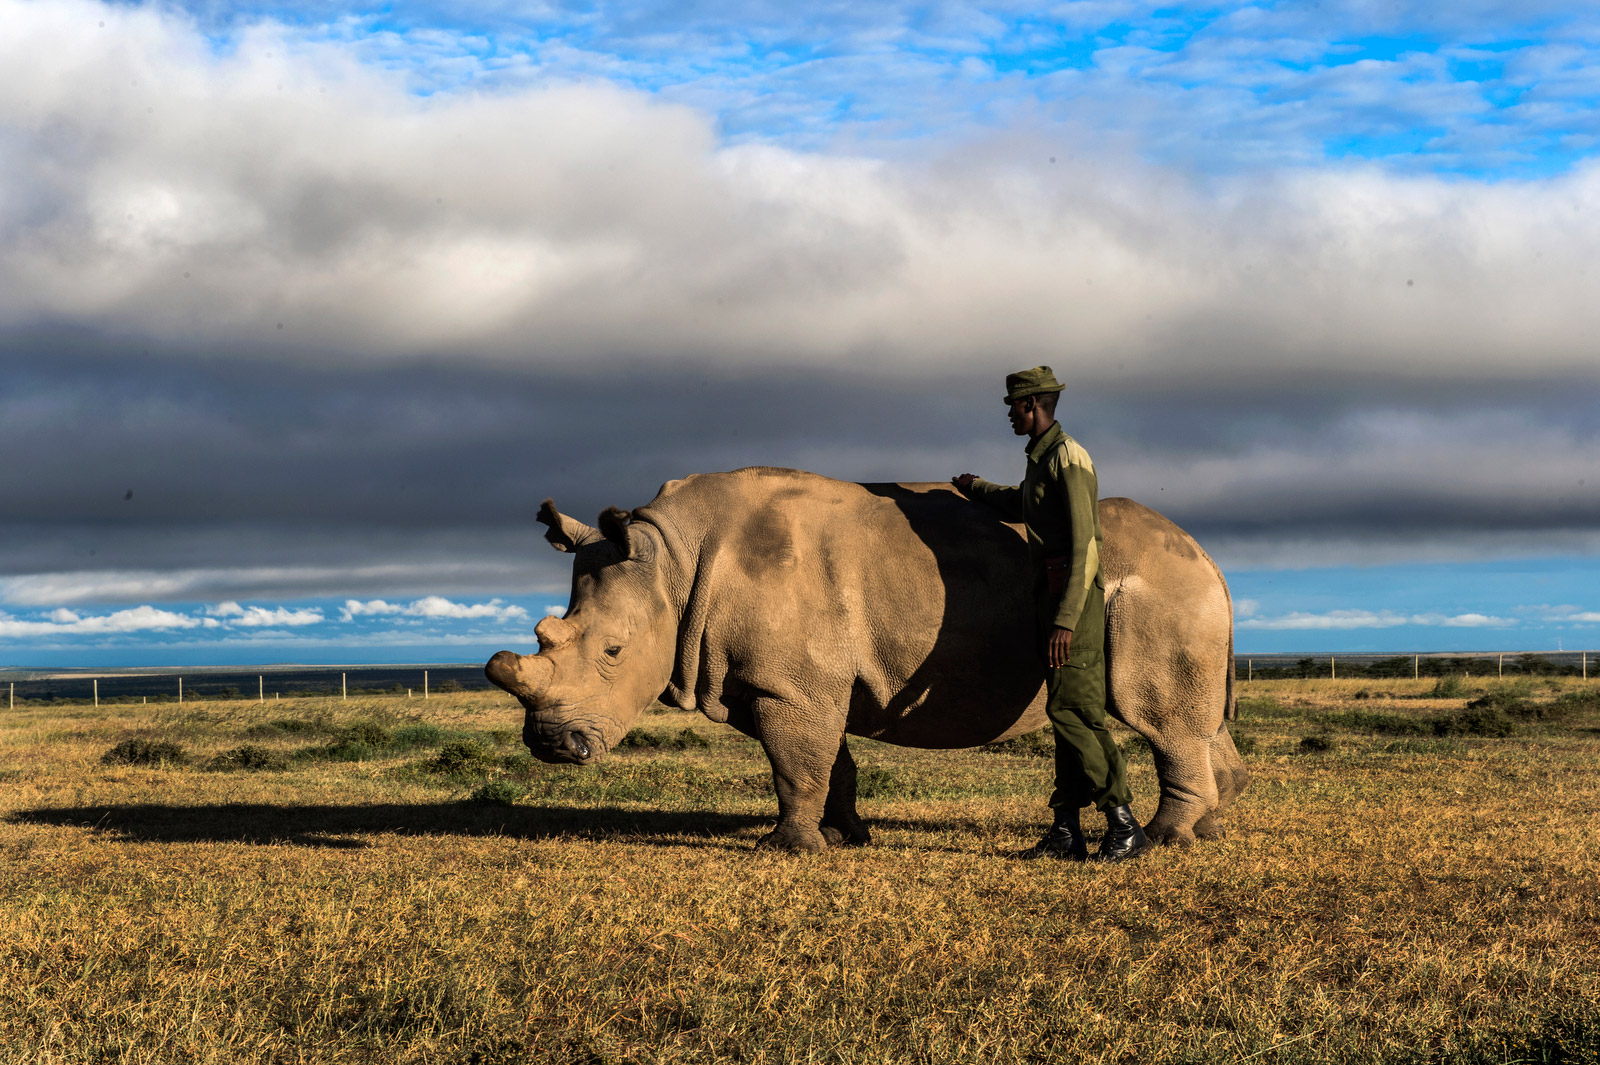 The life he lived: Photos of the last male northern white rhino - CNN.com